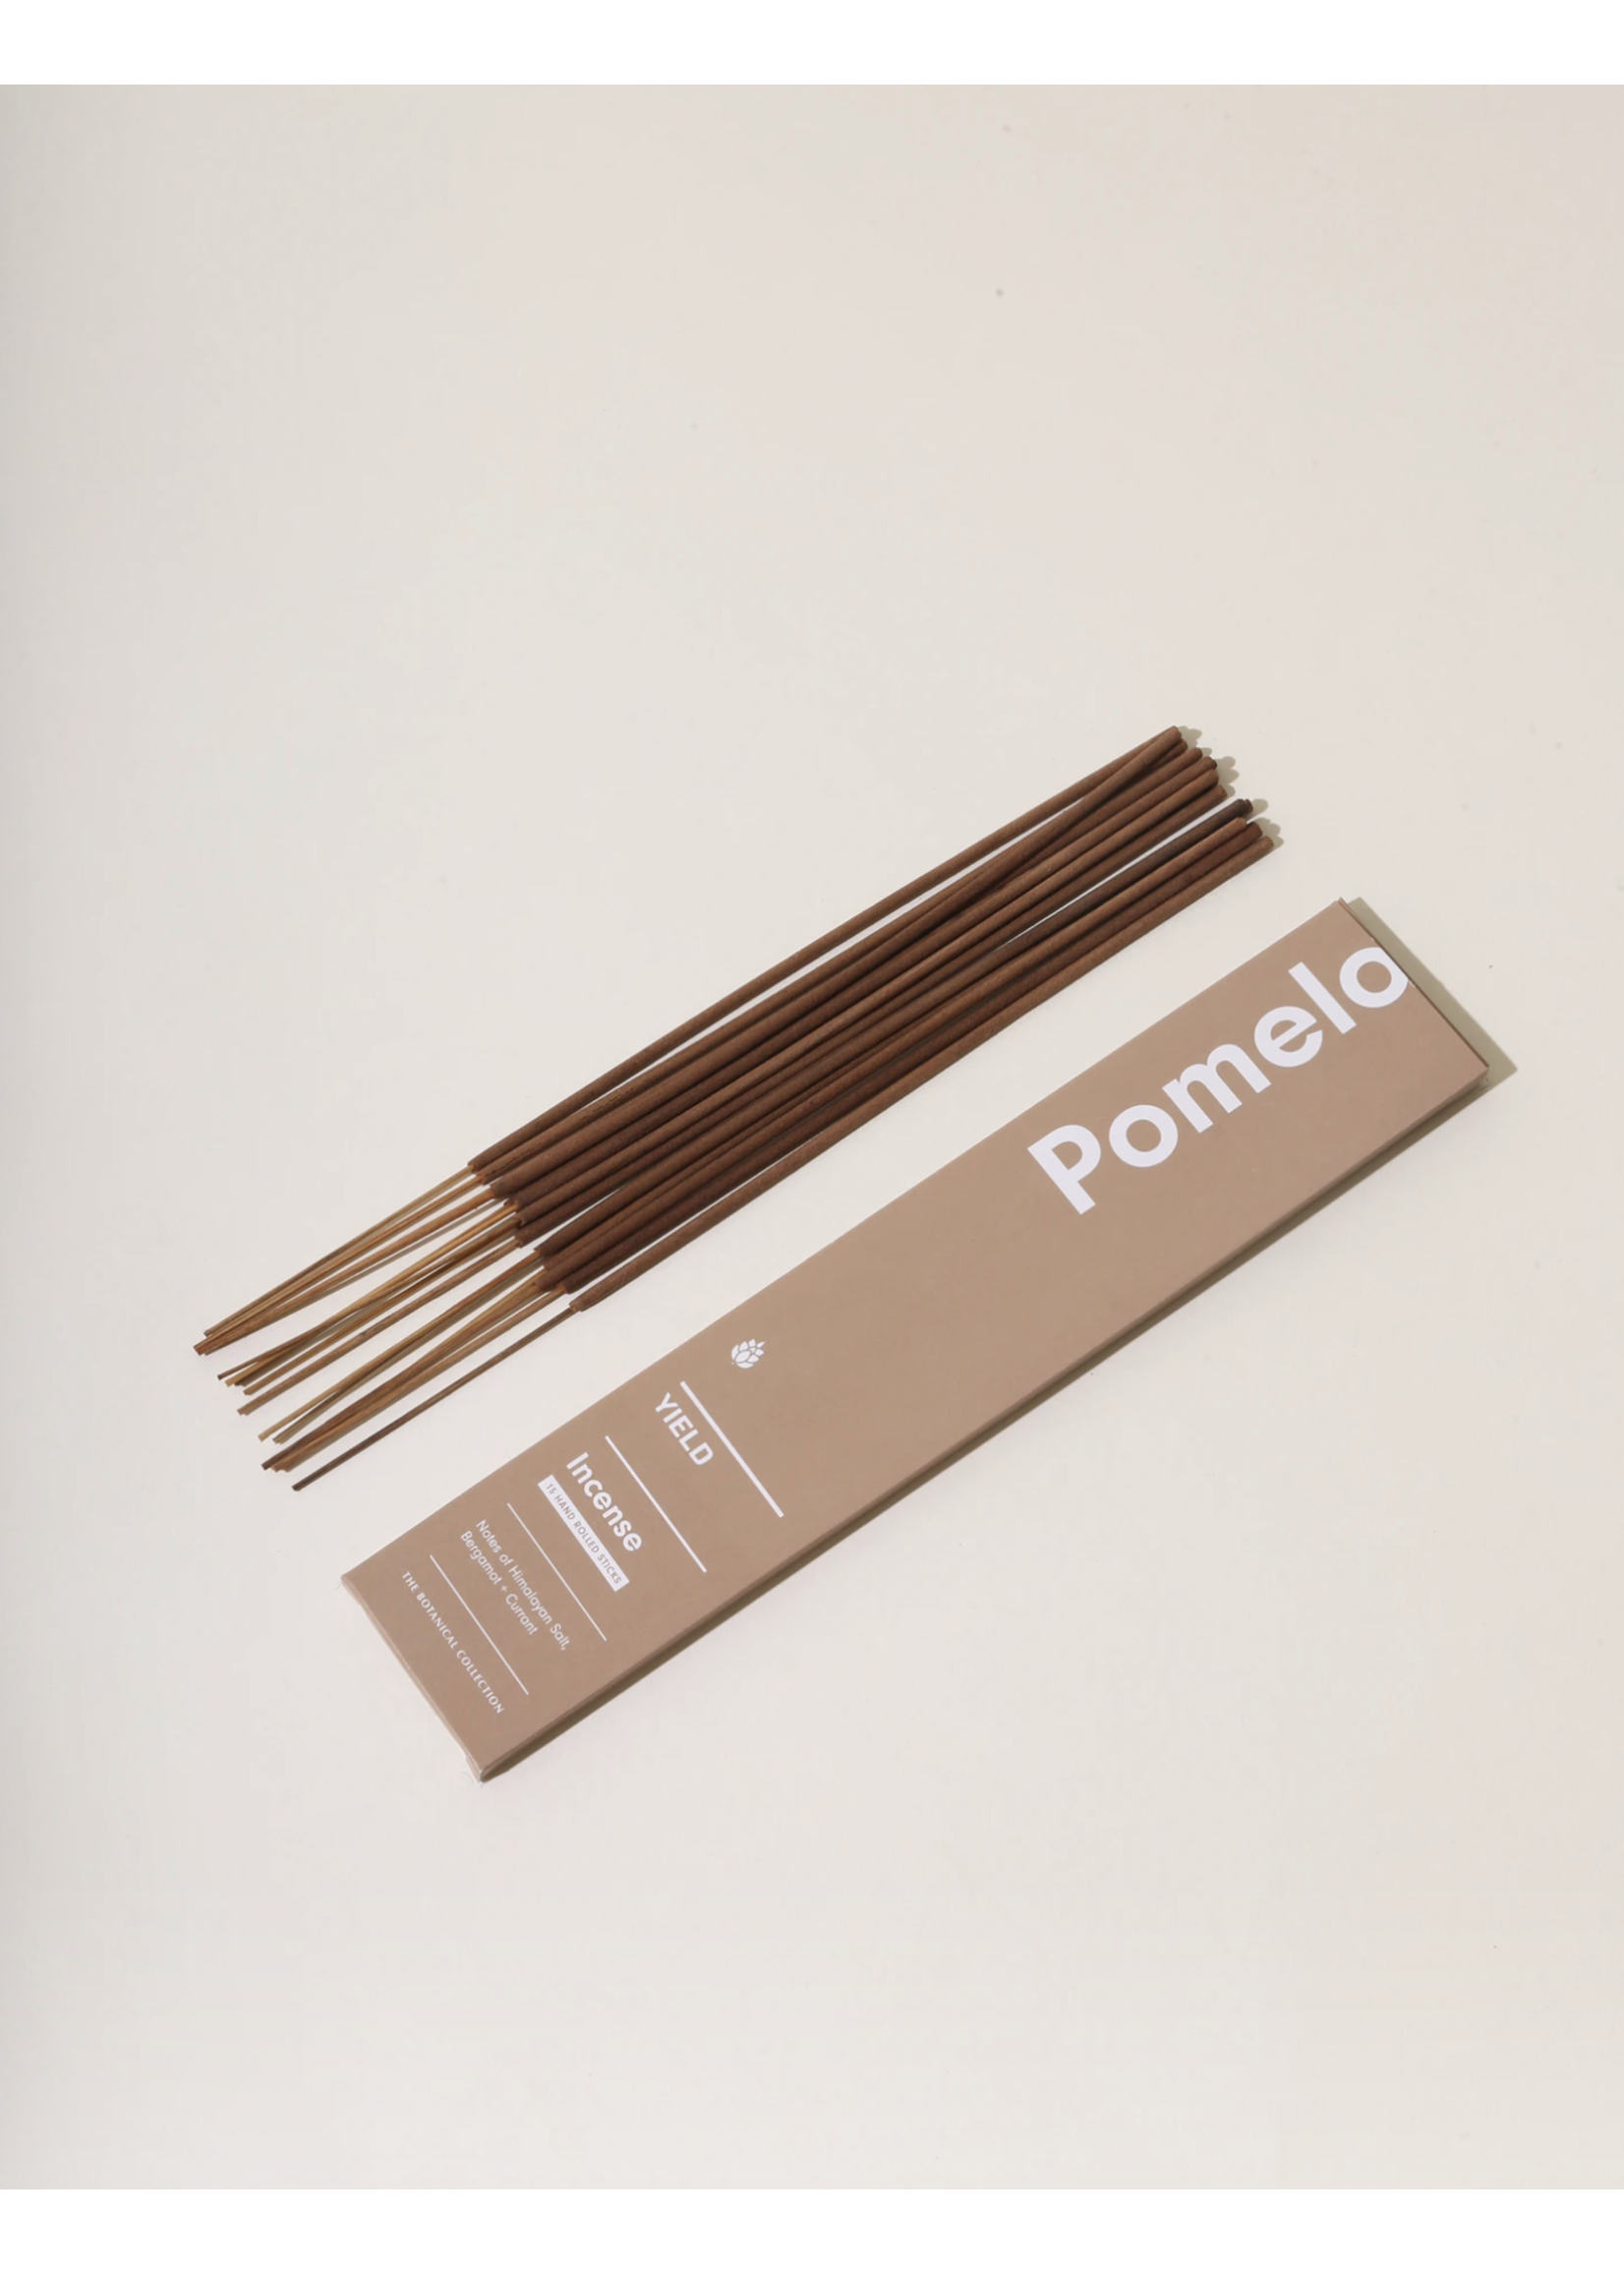 Yield Design Incense Sticks by Yield